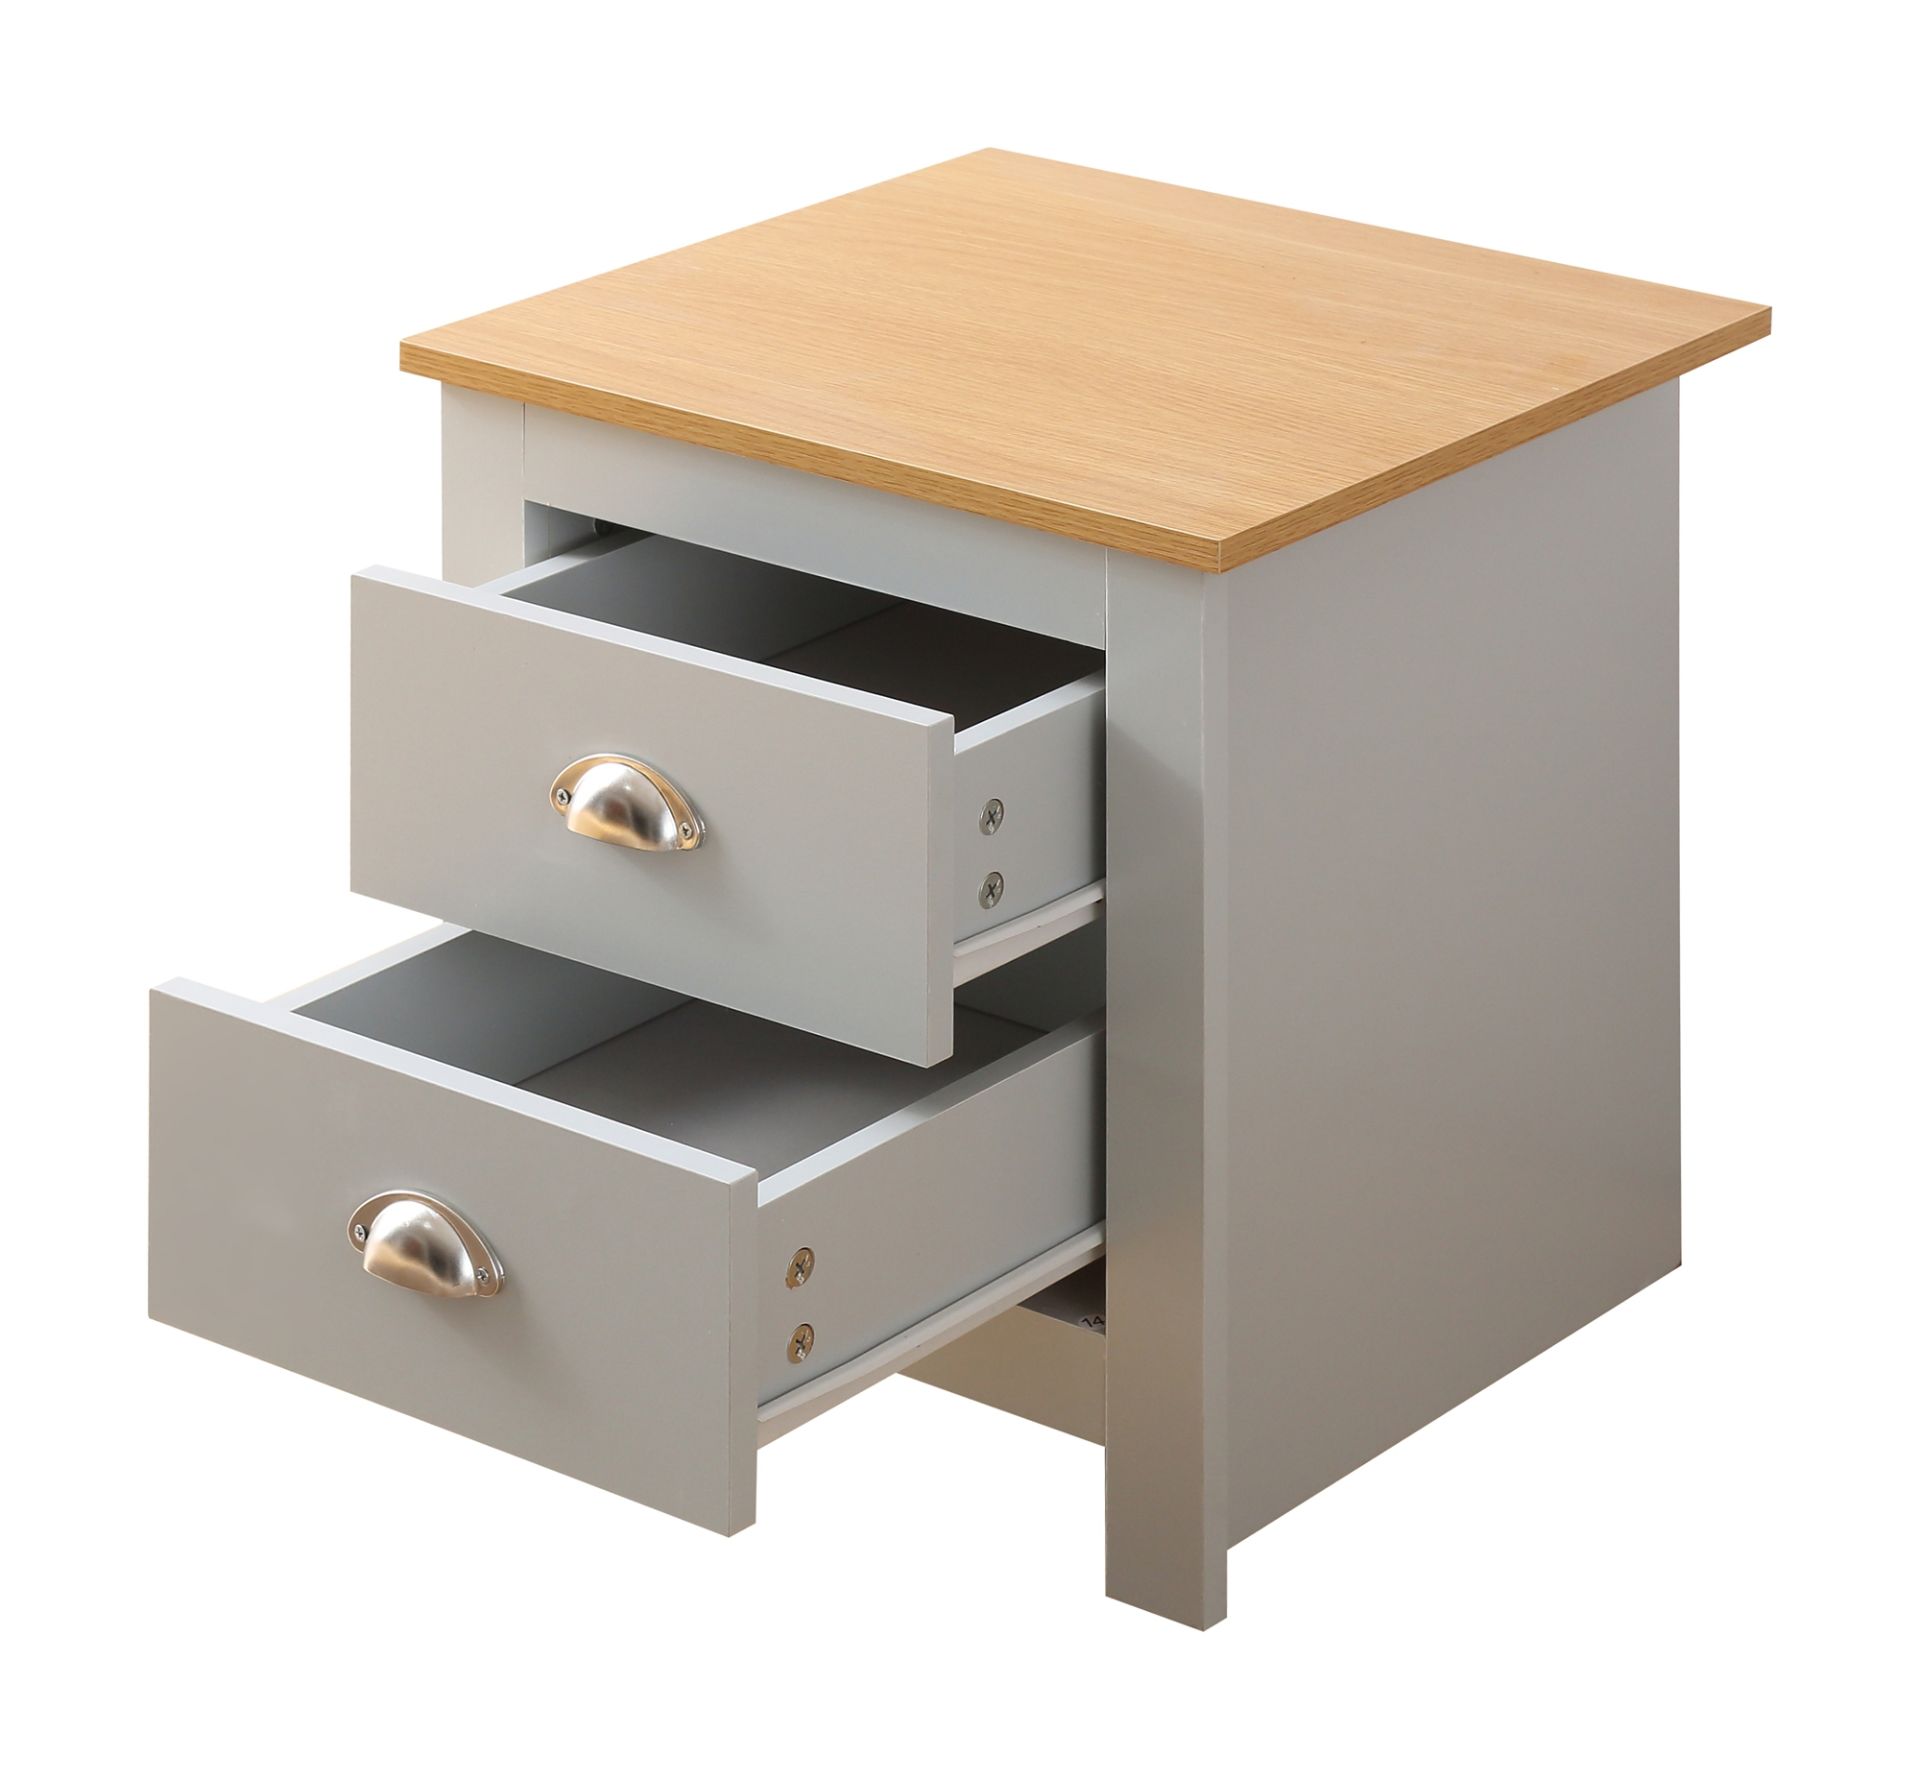 PAIR OF GREY WITH OAK TOP SHAKER-INSPIRED STYLISH DESIGN BEDSIDES - Image 4 of 4